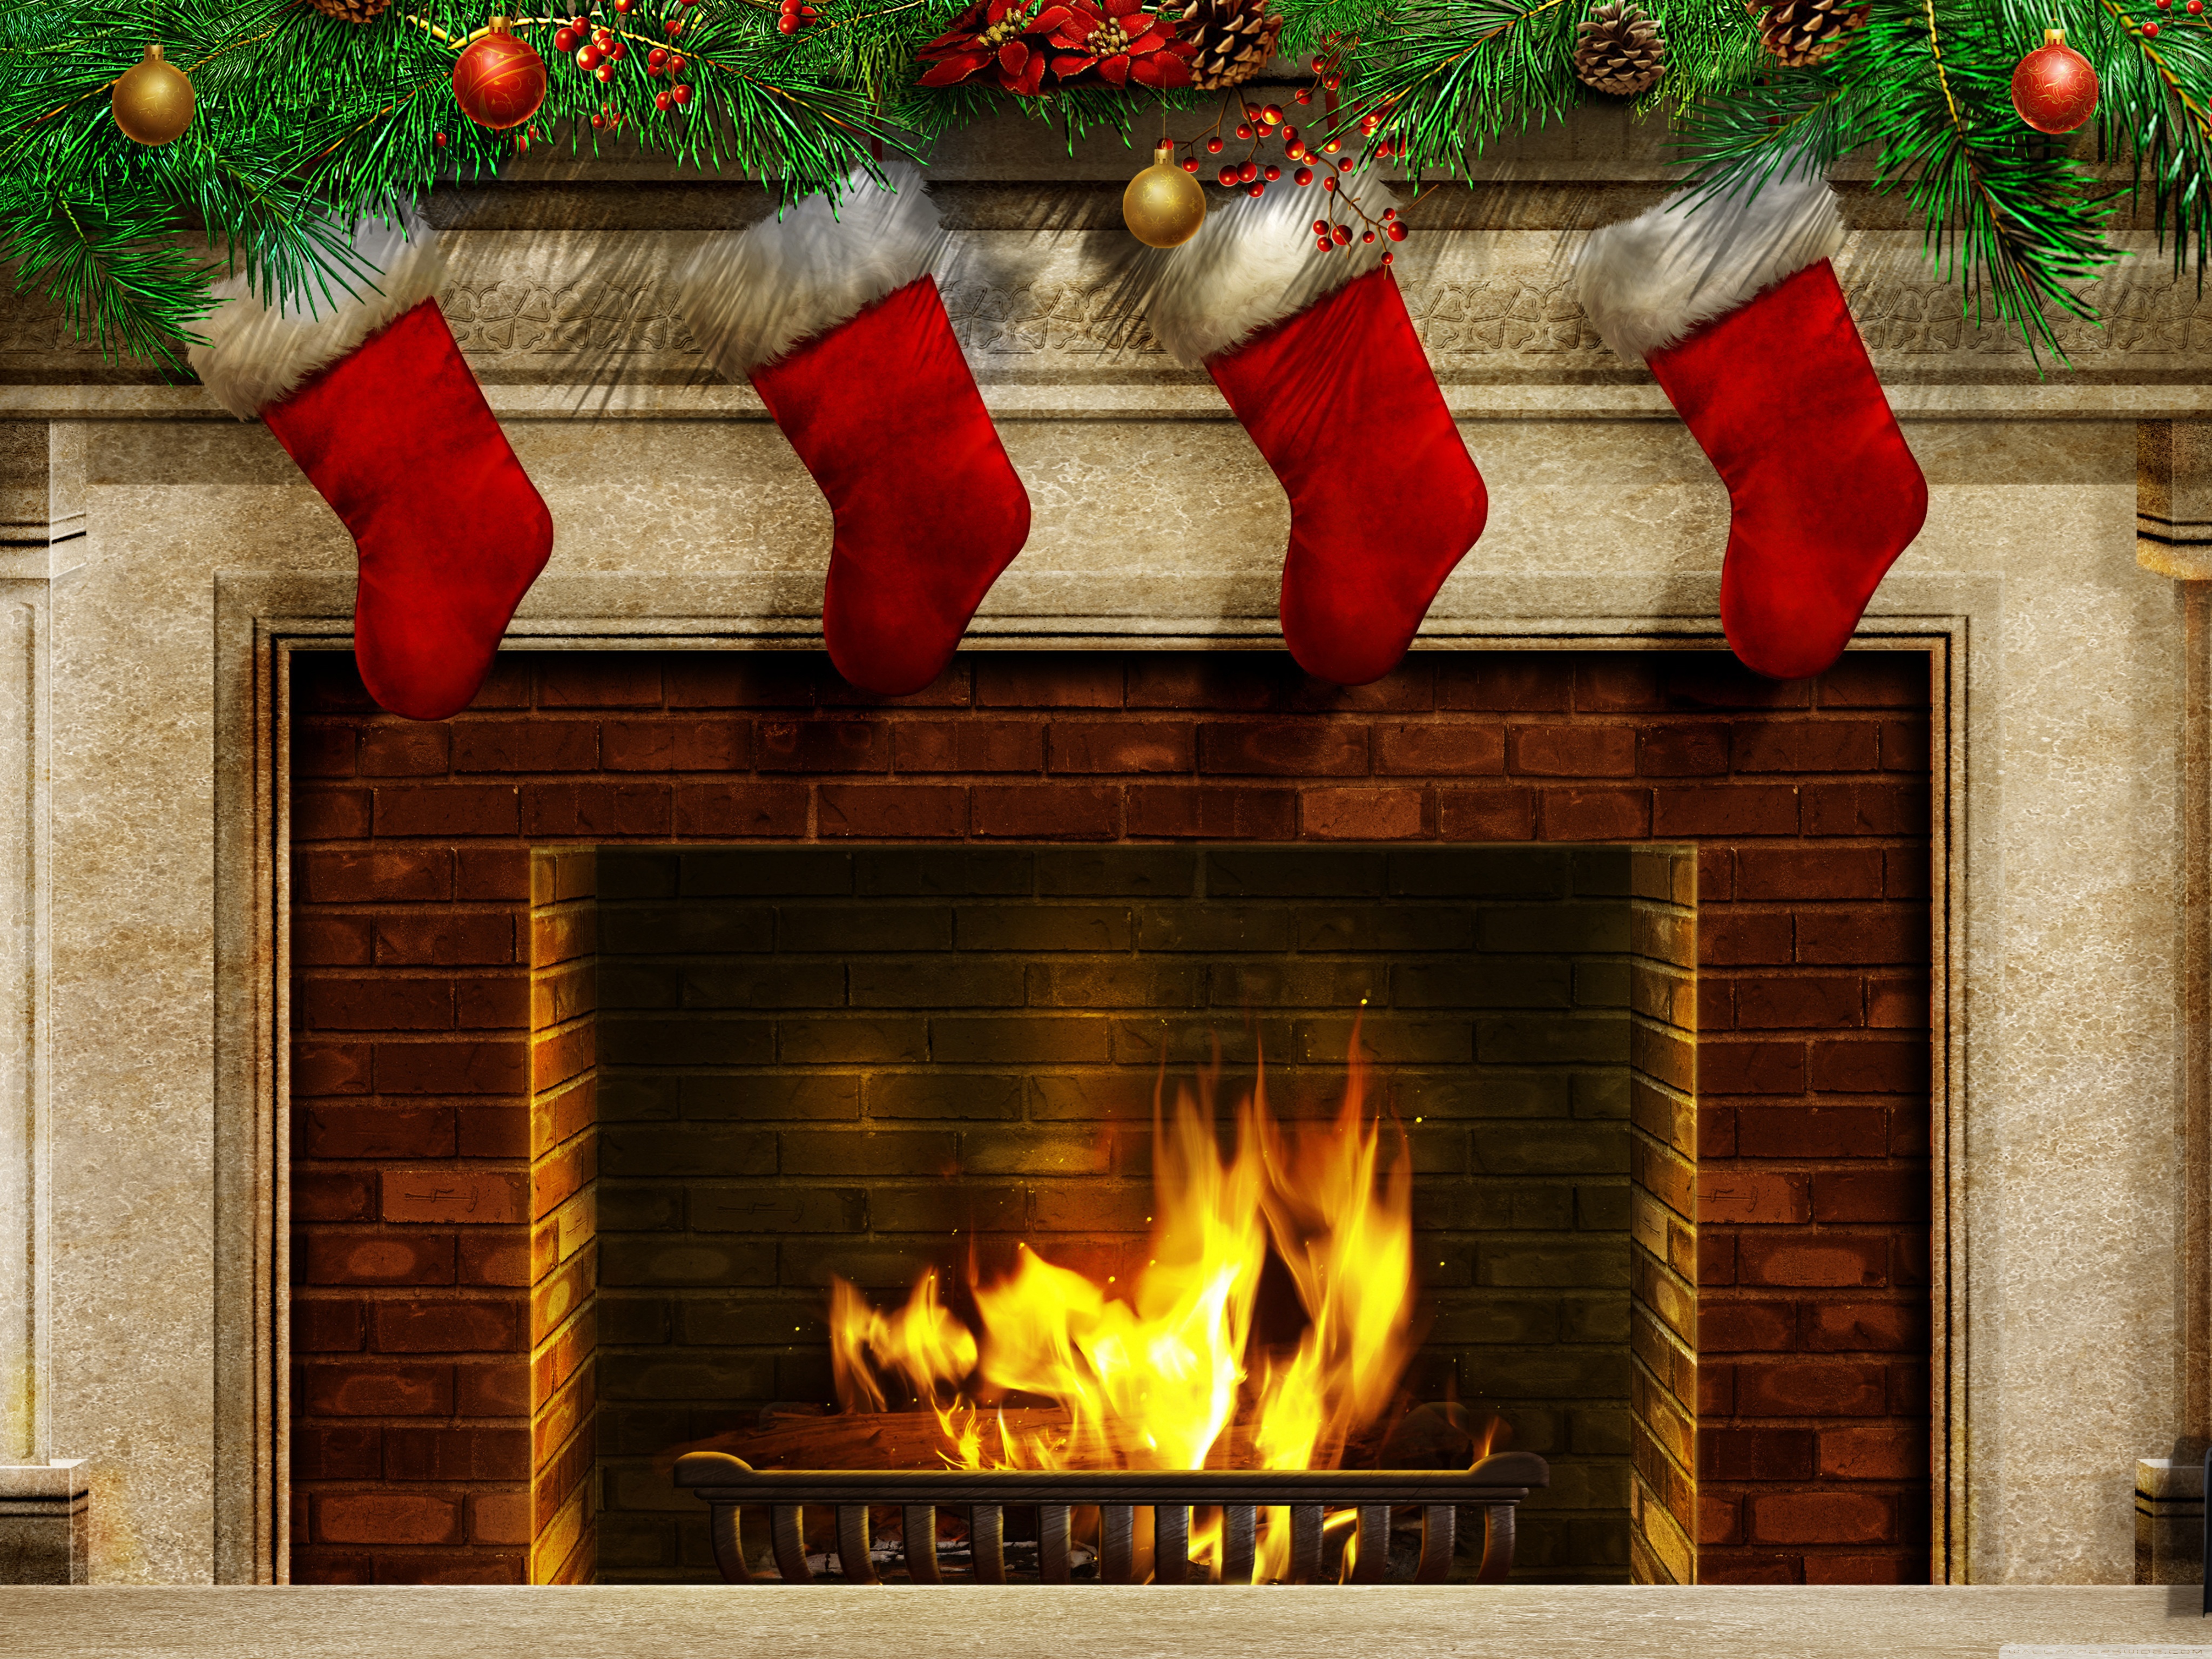 New Year S Socks At A Fireplace Wallpaper And Image